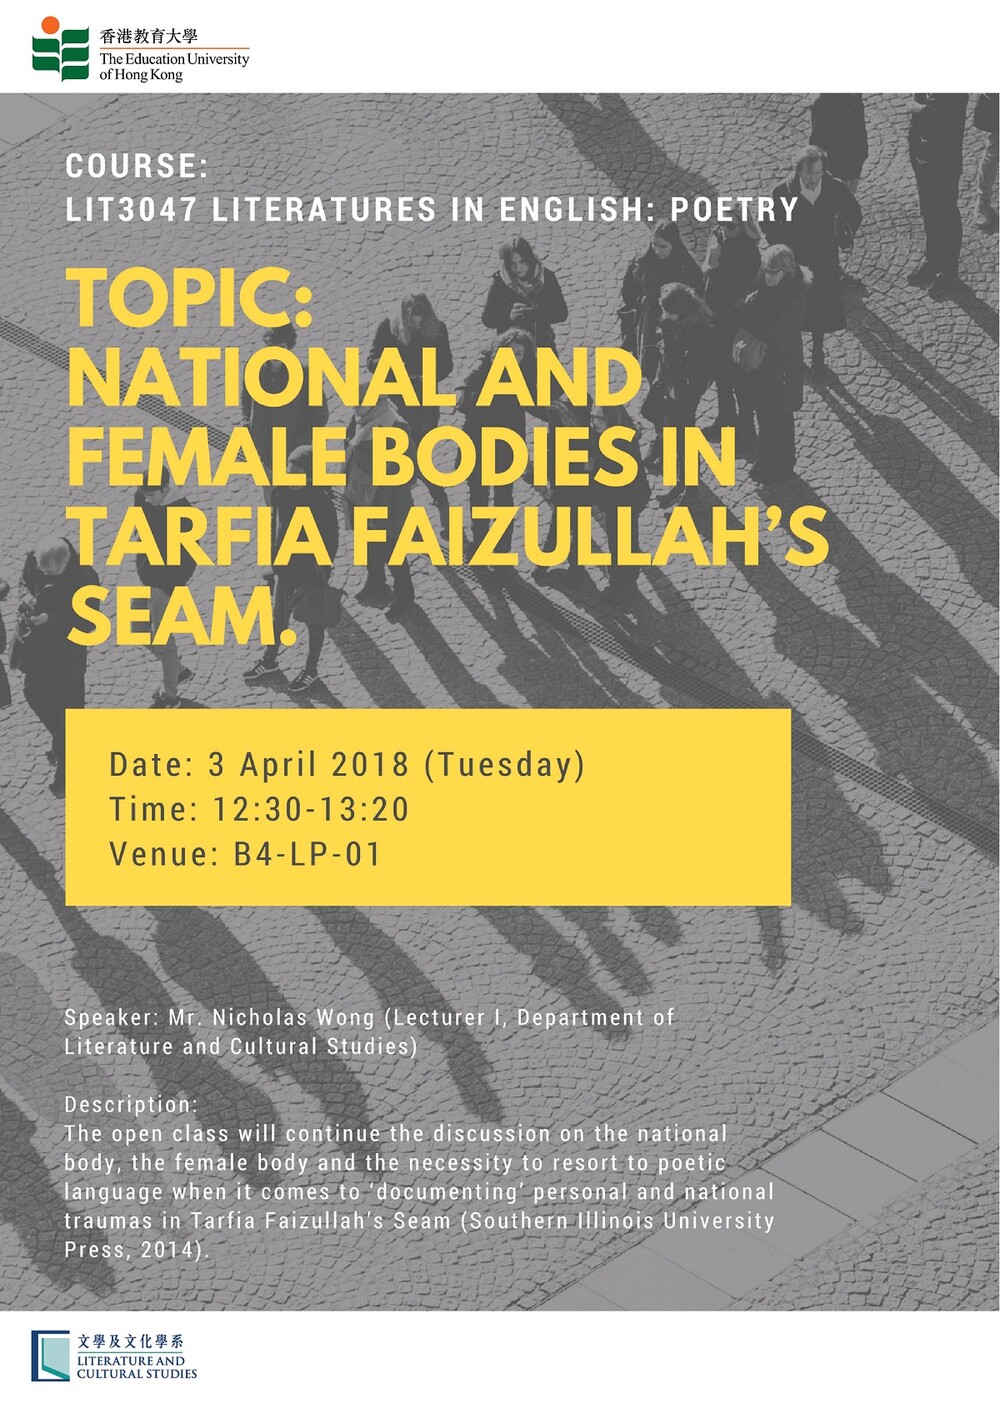 National and Female Bodies in Faizullah's Seam